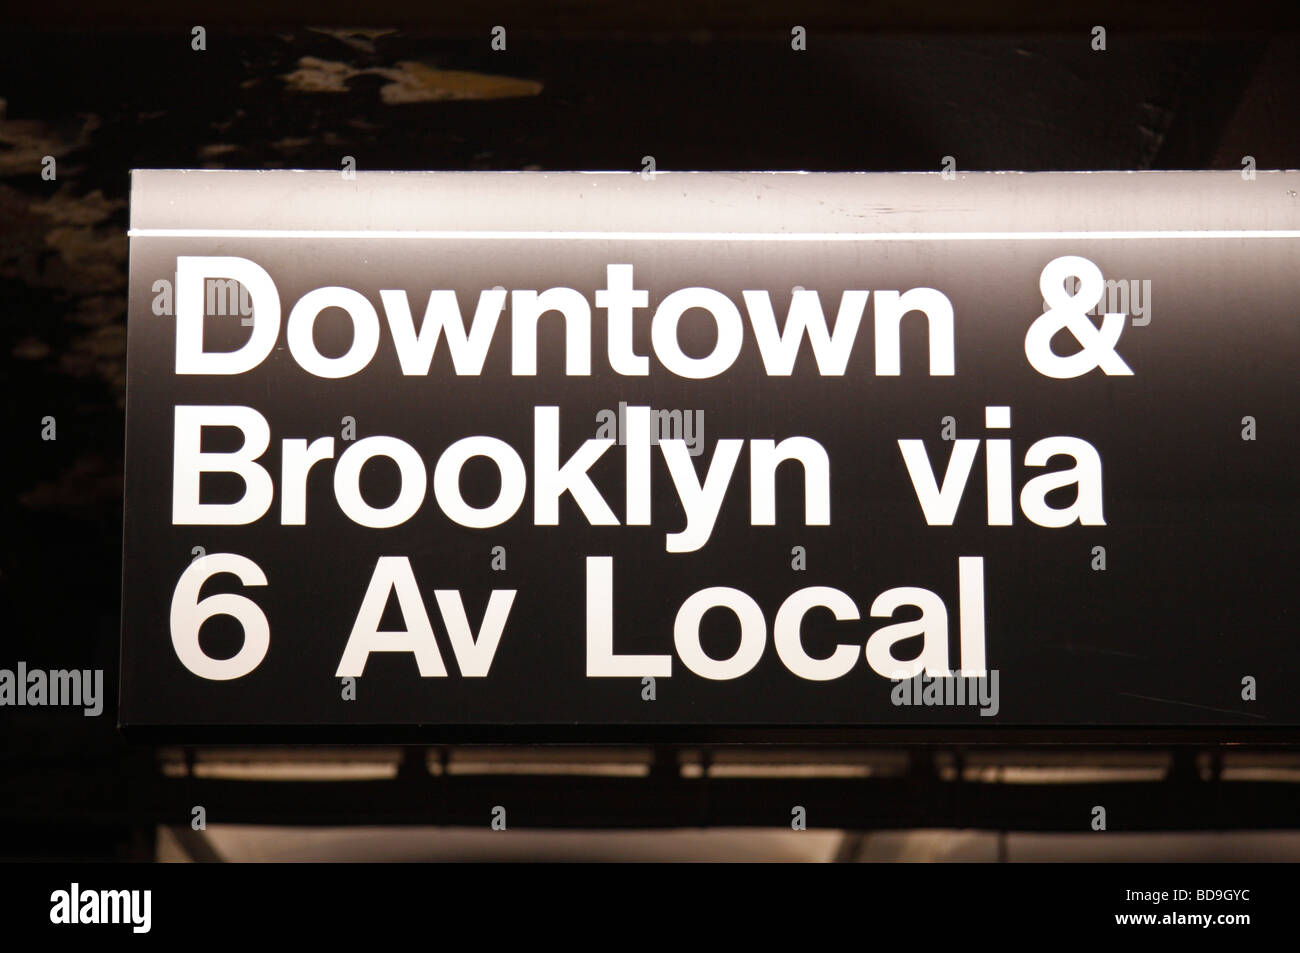 Downtown & Brooklyn sign for Line 6 inside a New York Subway station, United States. Stock Photo